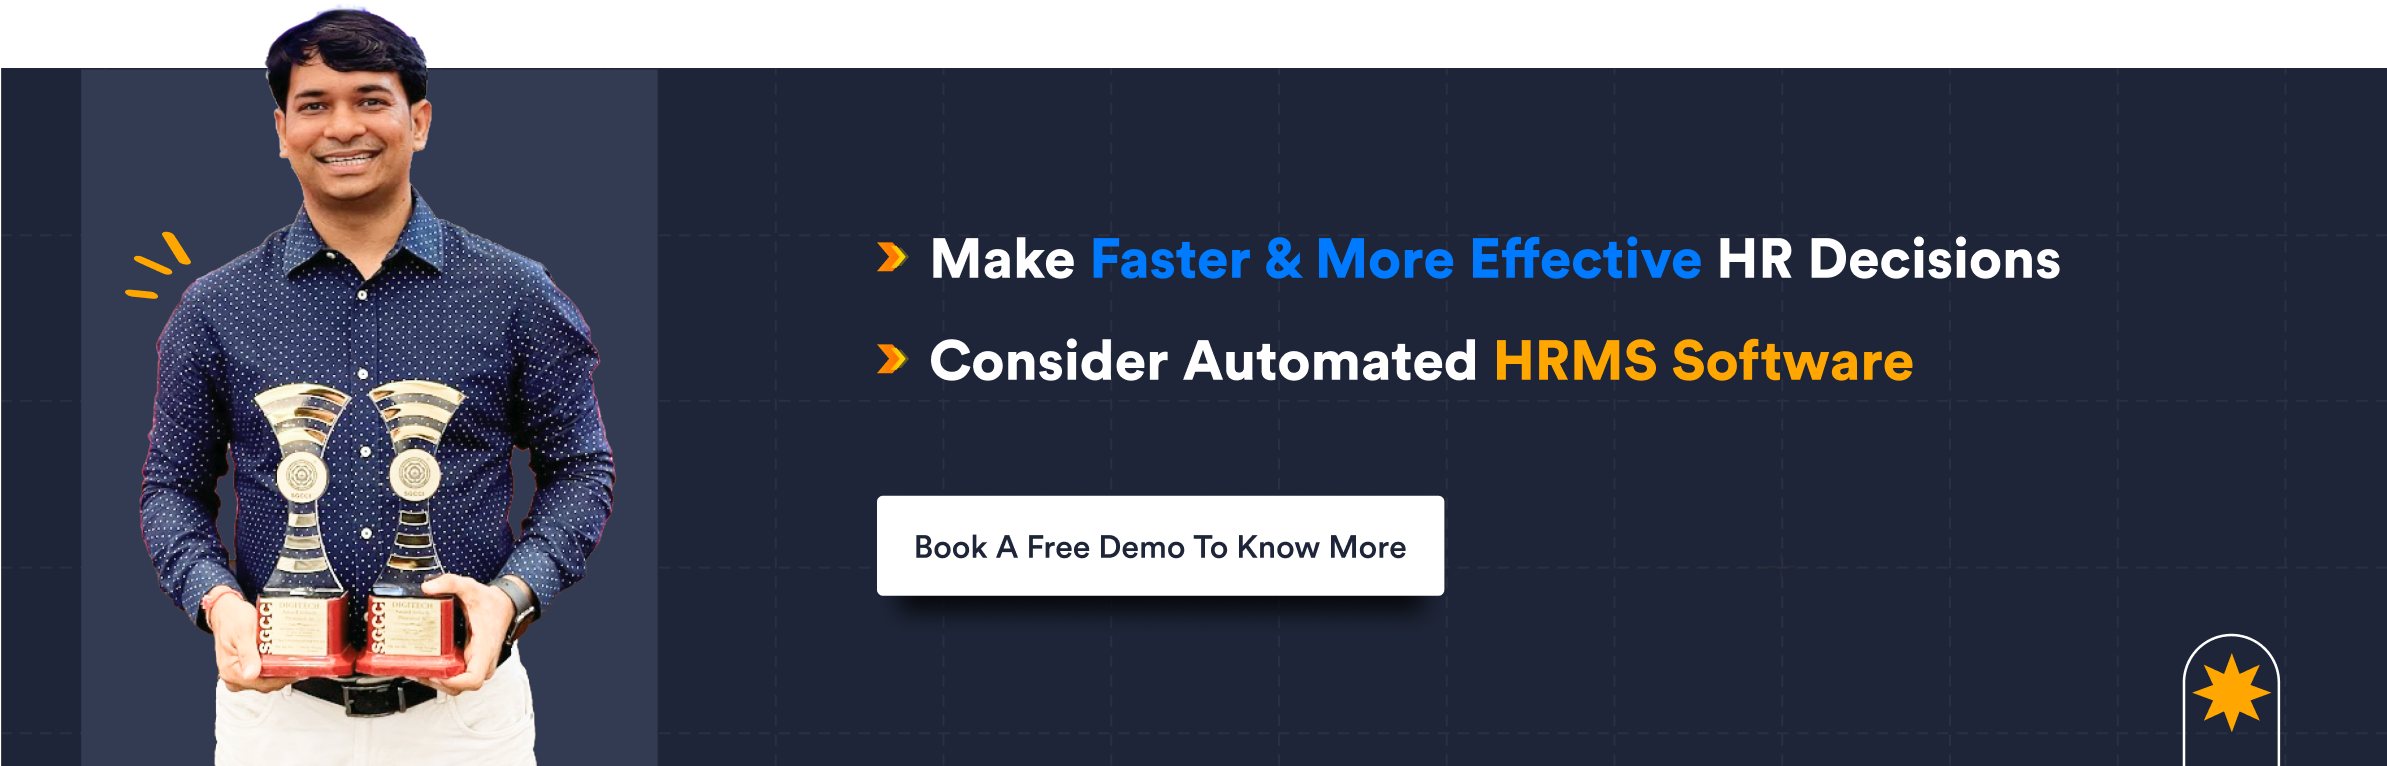 Make Faster More Effective HR Decisions